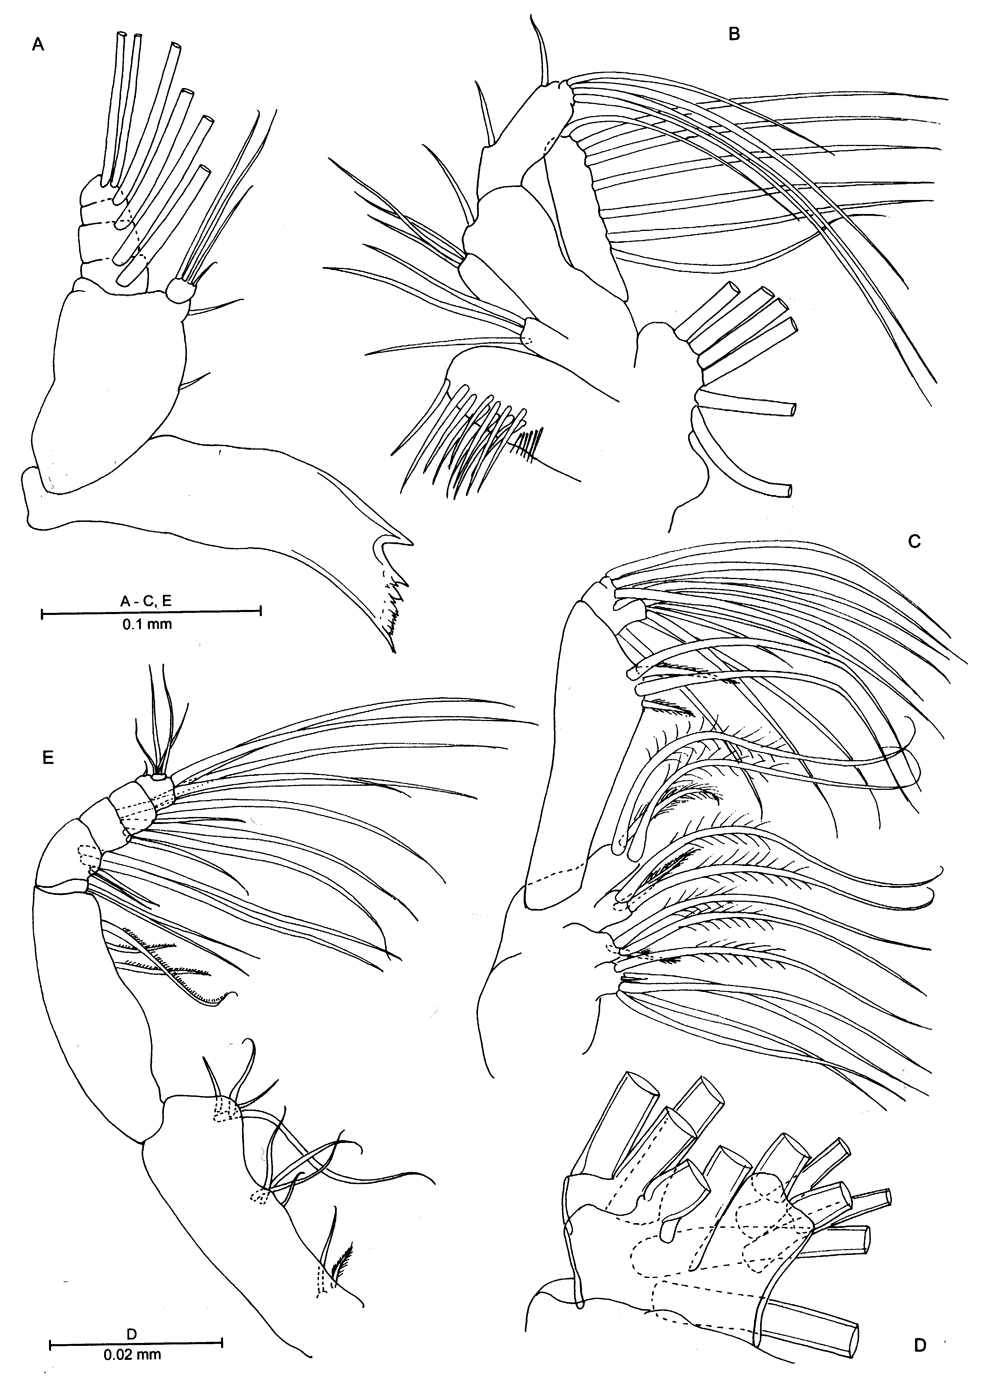 Species Gloinella yagerae - Plate 2 of morphological figures